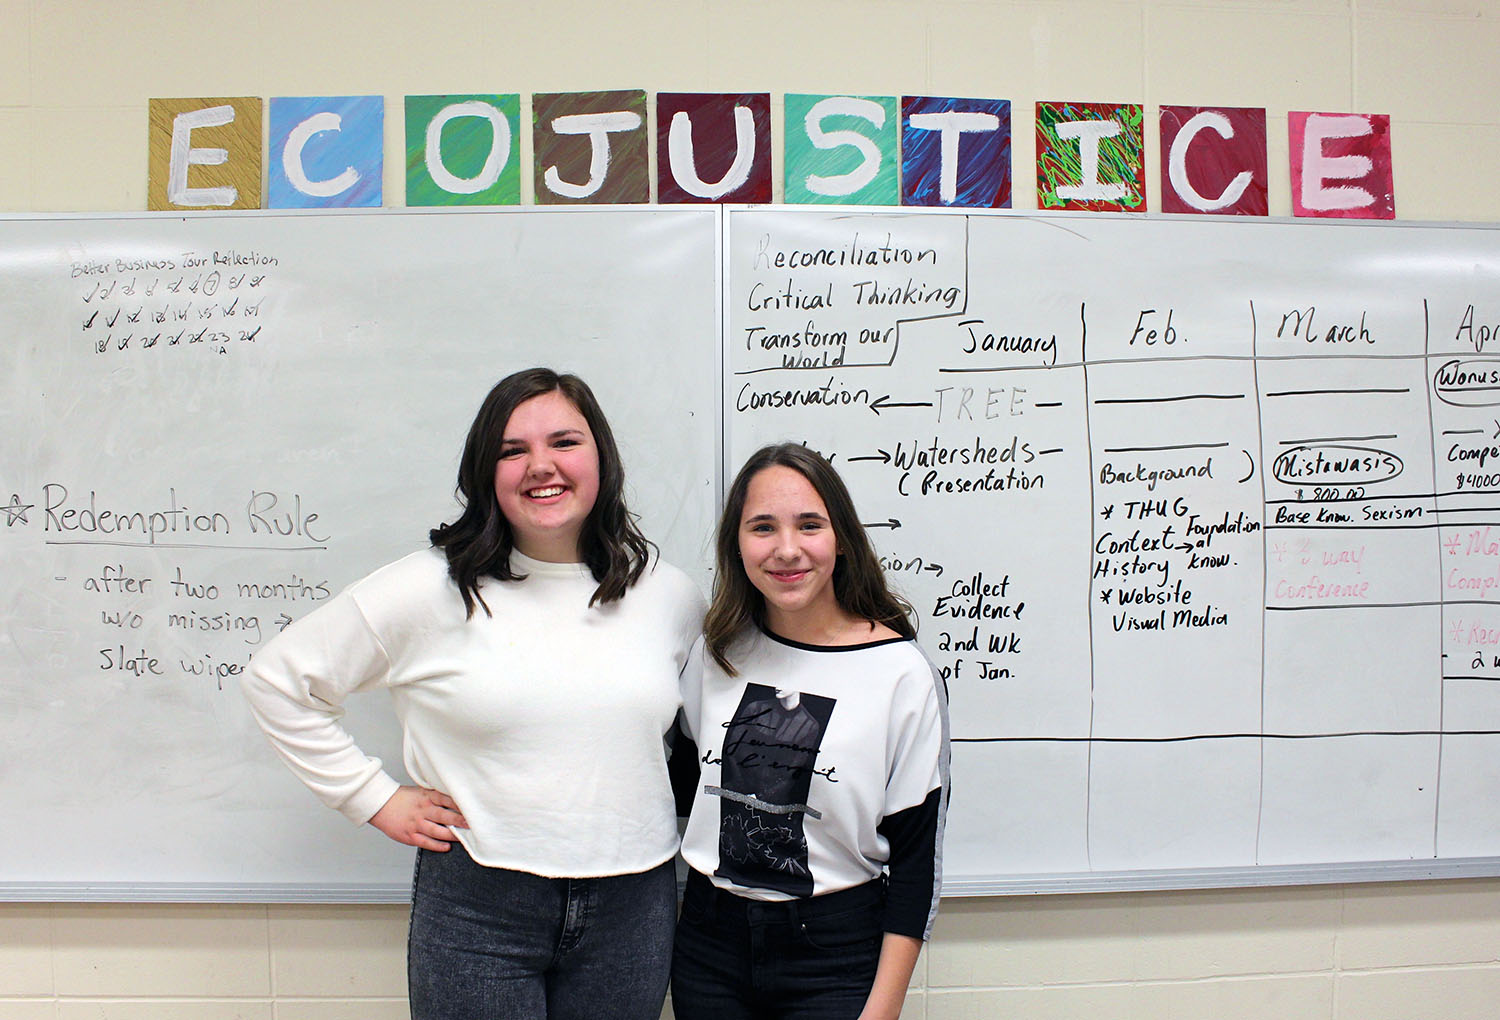 Grade 8 EcoJustice students Ava Visentini (left) and Aleksandra Zatorska (right) took part in leading a forum discussion for other students on how to prevent food waste in daily life, following the Health Sciences screening of the documentary Just Eat It.